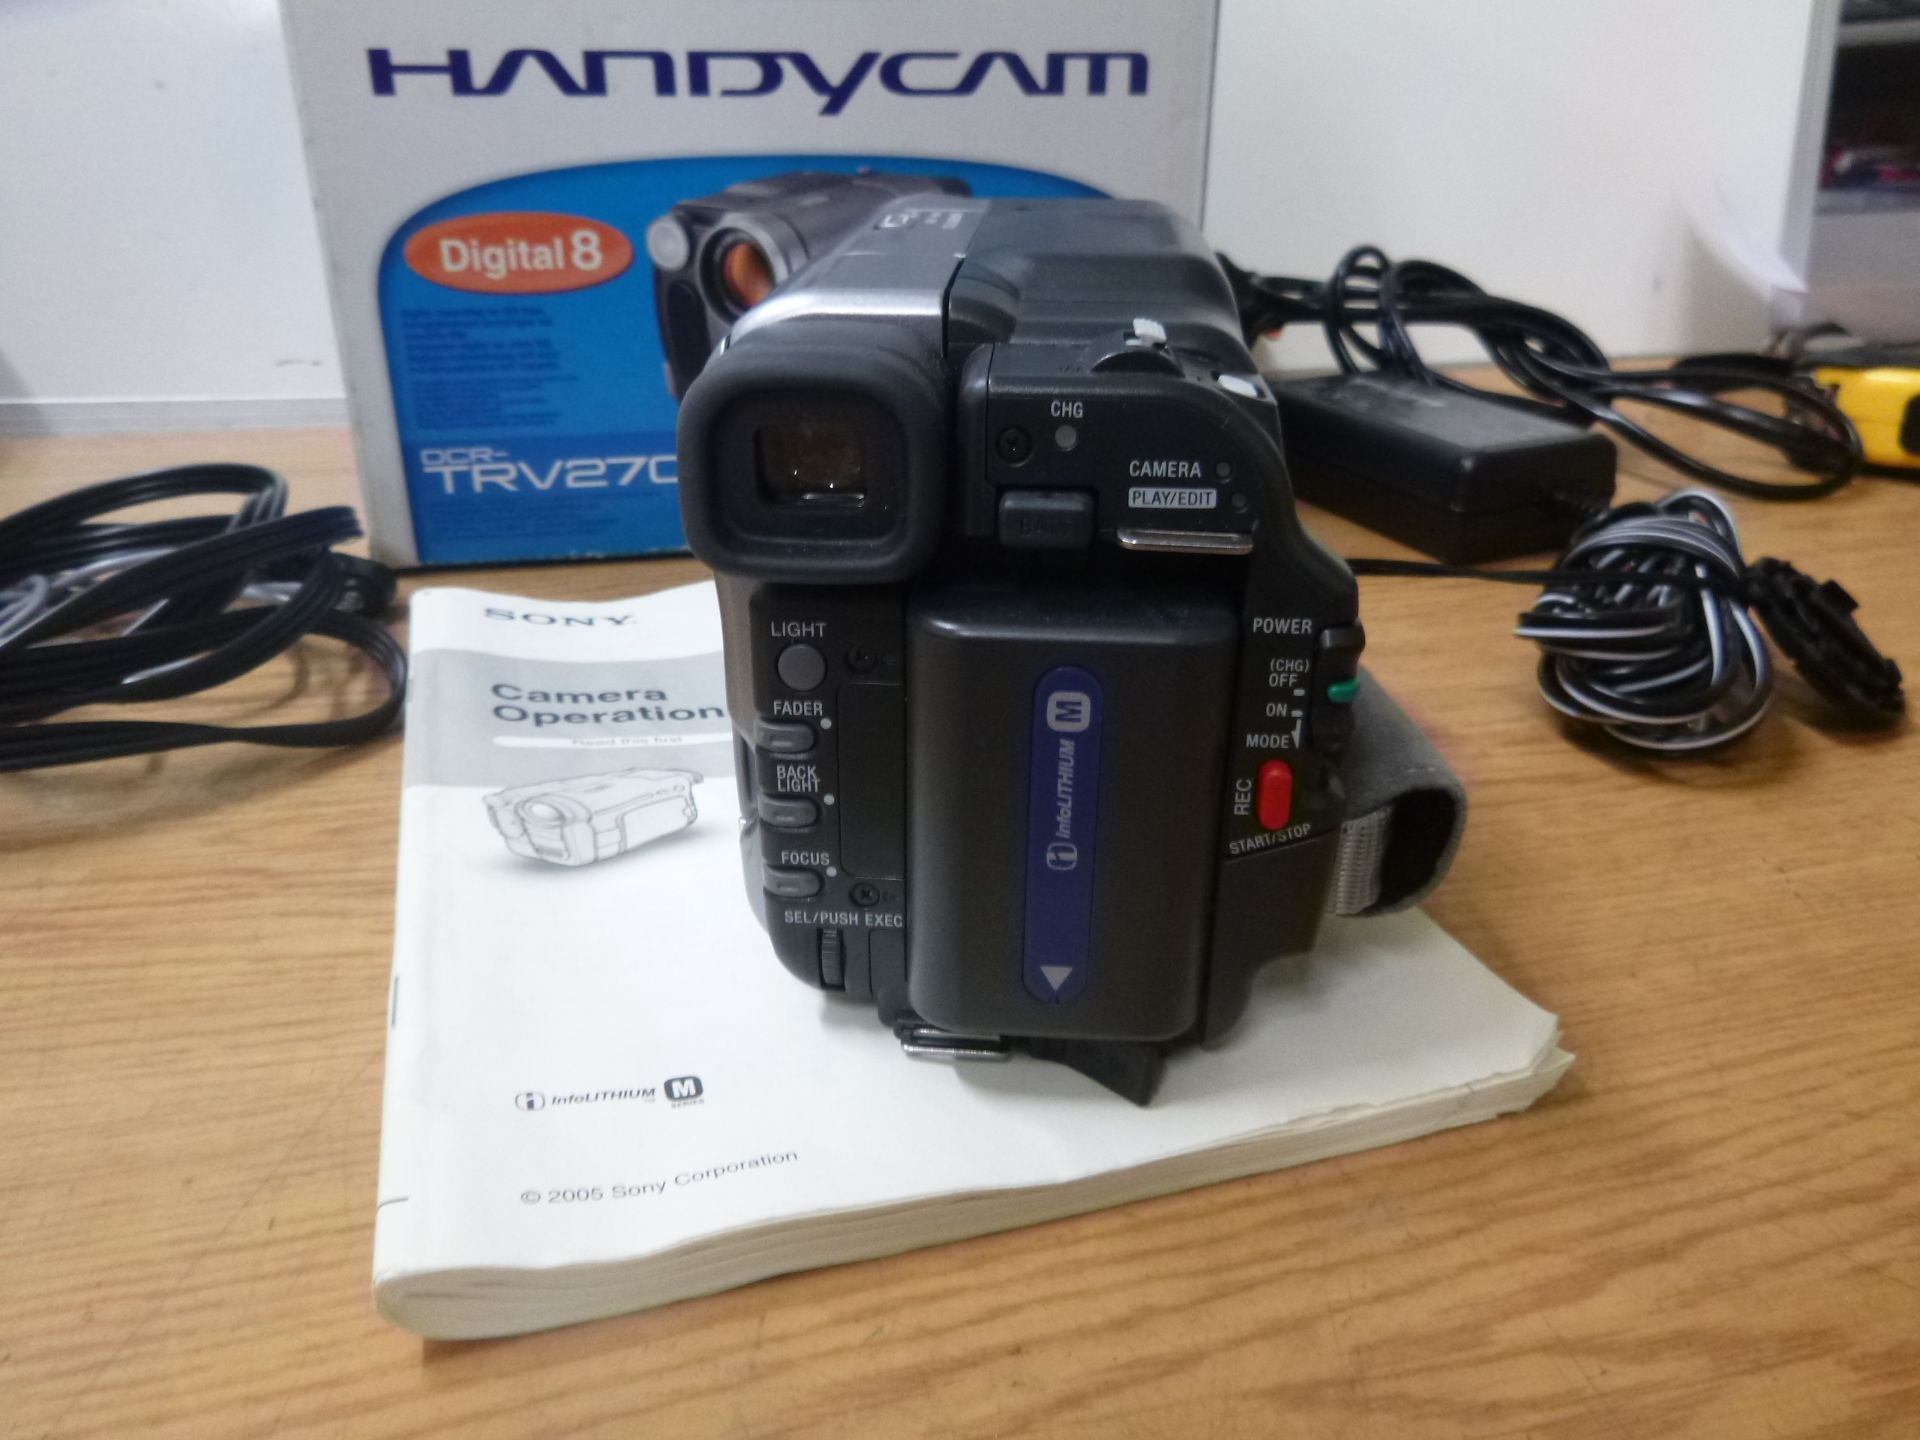 SONY DIGITAL CAMCORDER MODEL DCRTRV270E. BOXED WITH CHARGER, USERS GUIDE, CABLES AND NEW TAPE - Image 4 of 5